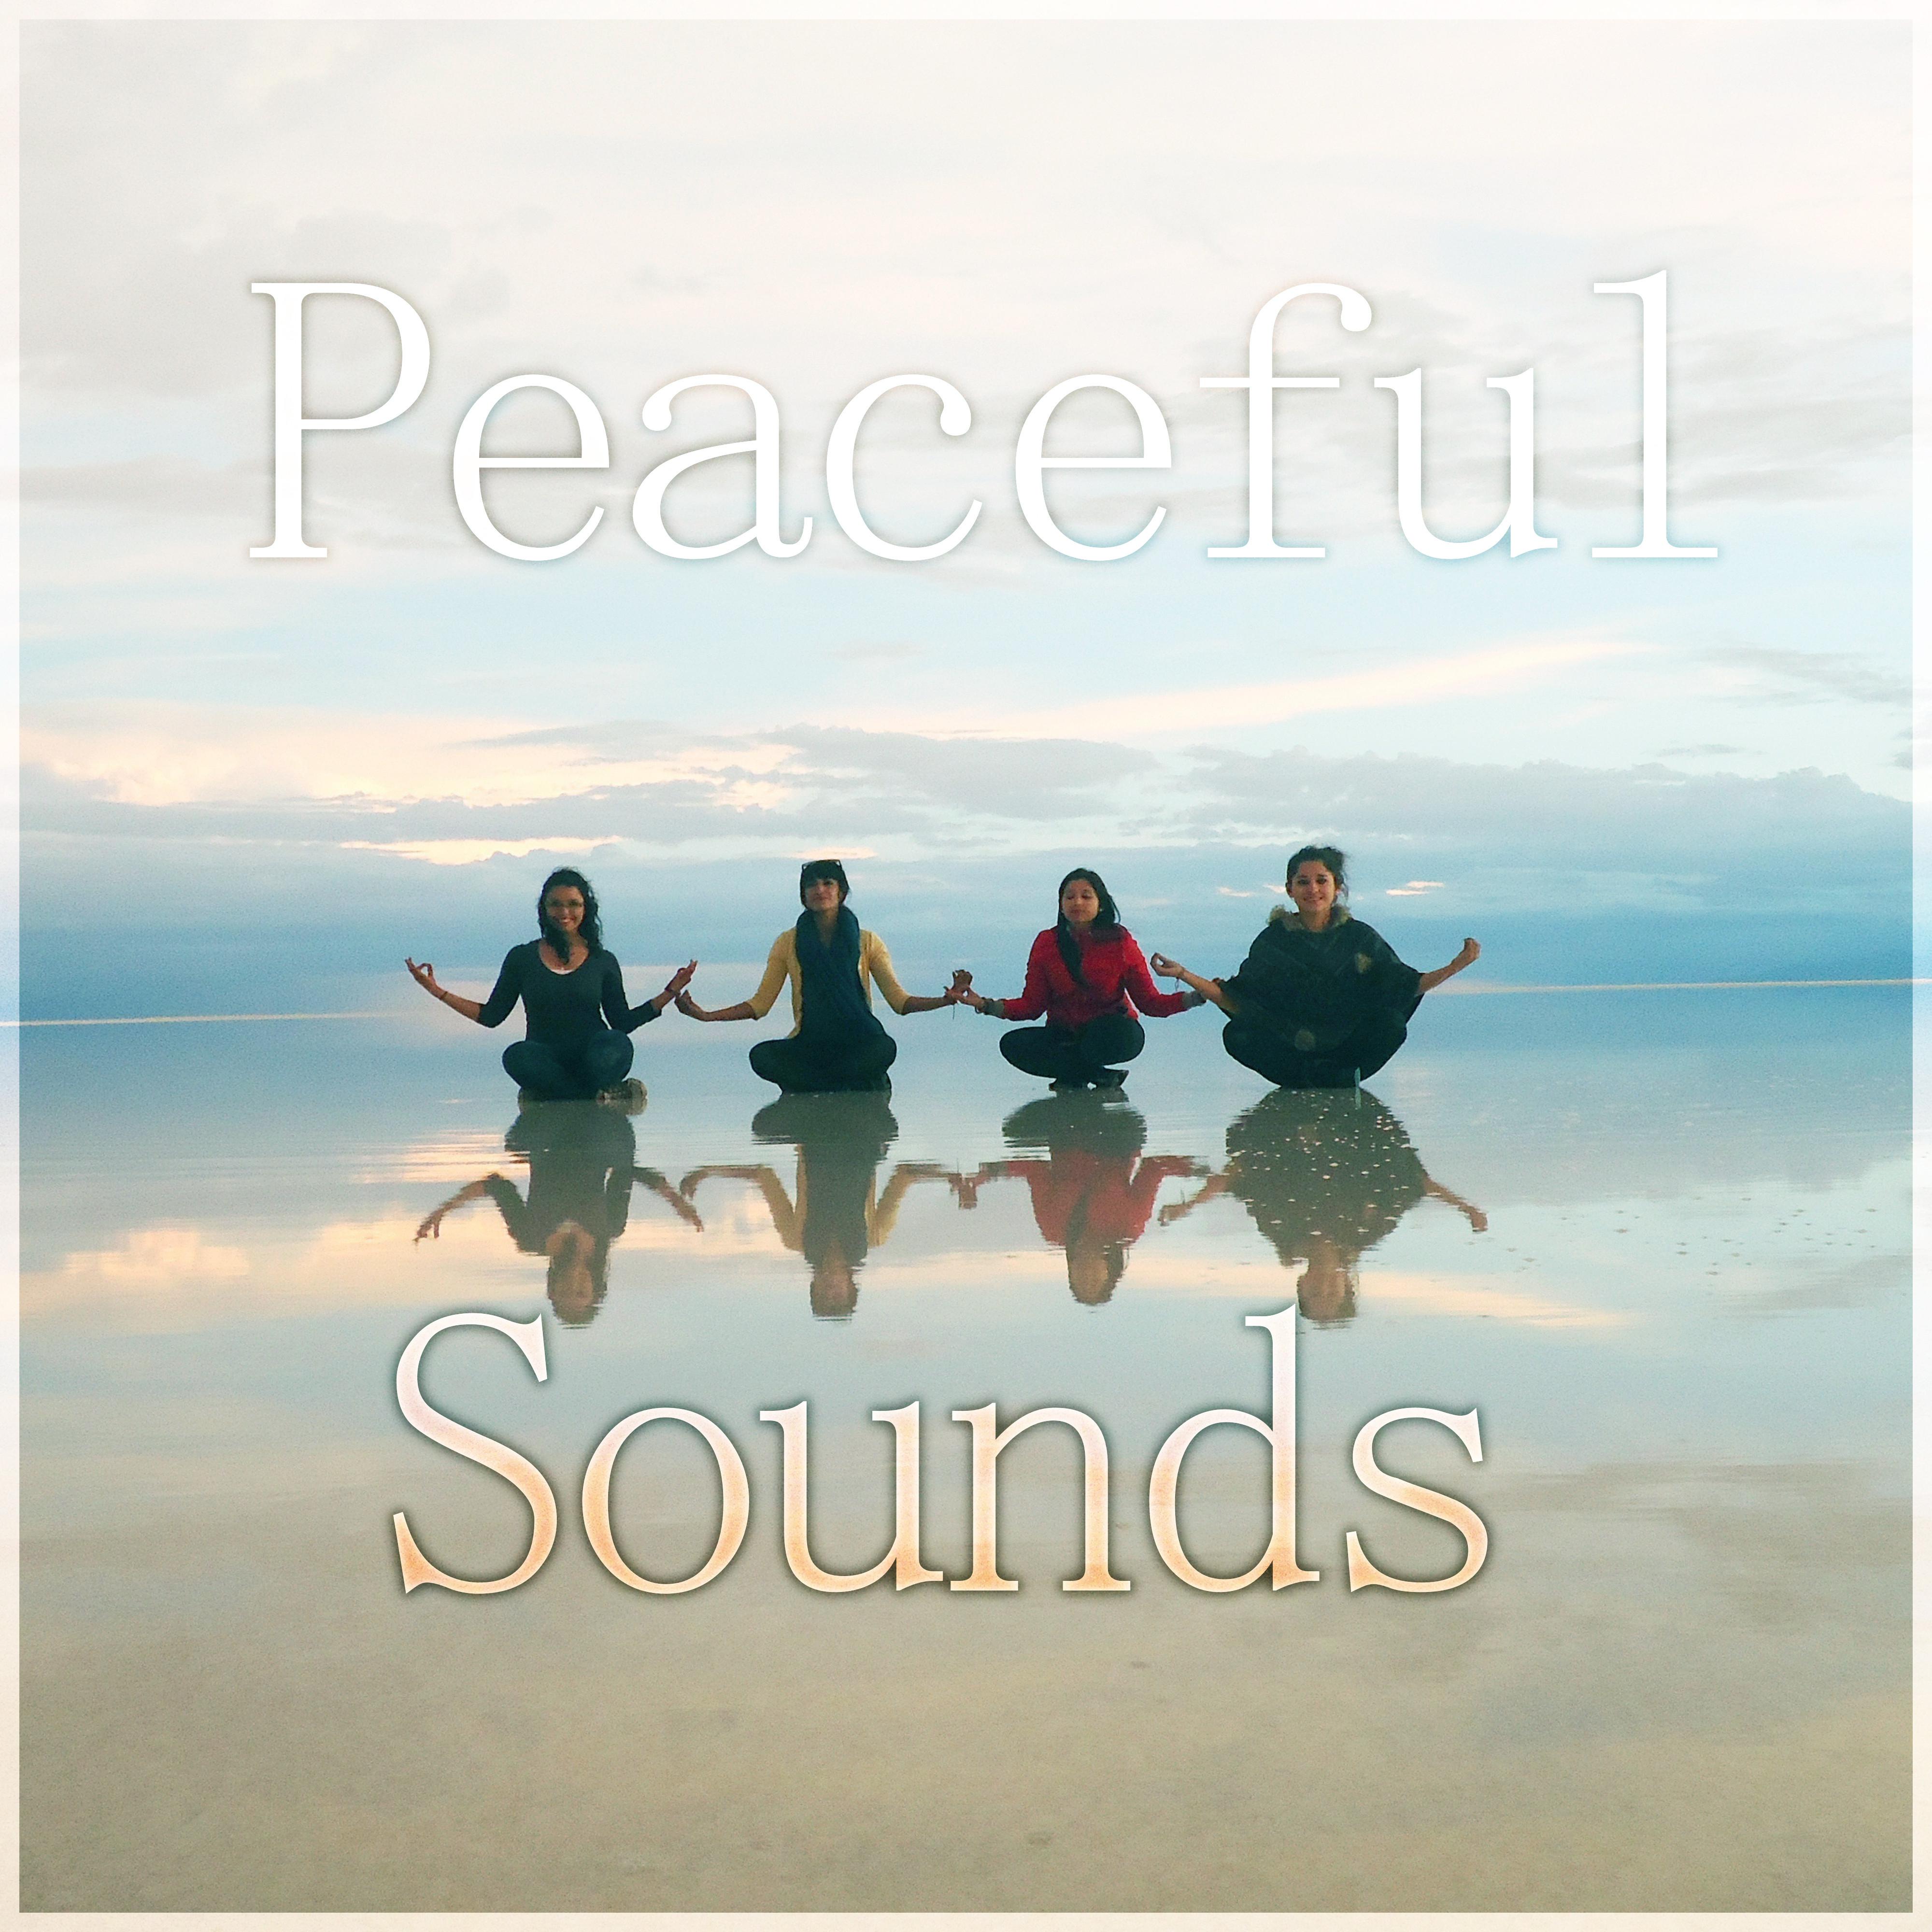 Peaceful Sounds - Good Day with Relaxing Sounds & Sounds of Nature, Calm Background Music for Reduce Stress the Body & Mind, Wake Up, Positive Attitude to the World, Morning Coffee, YogaMusic